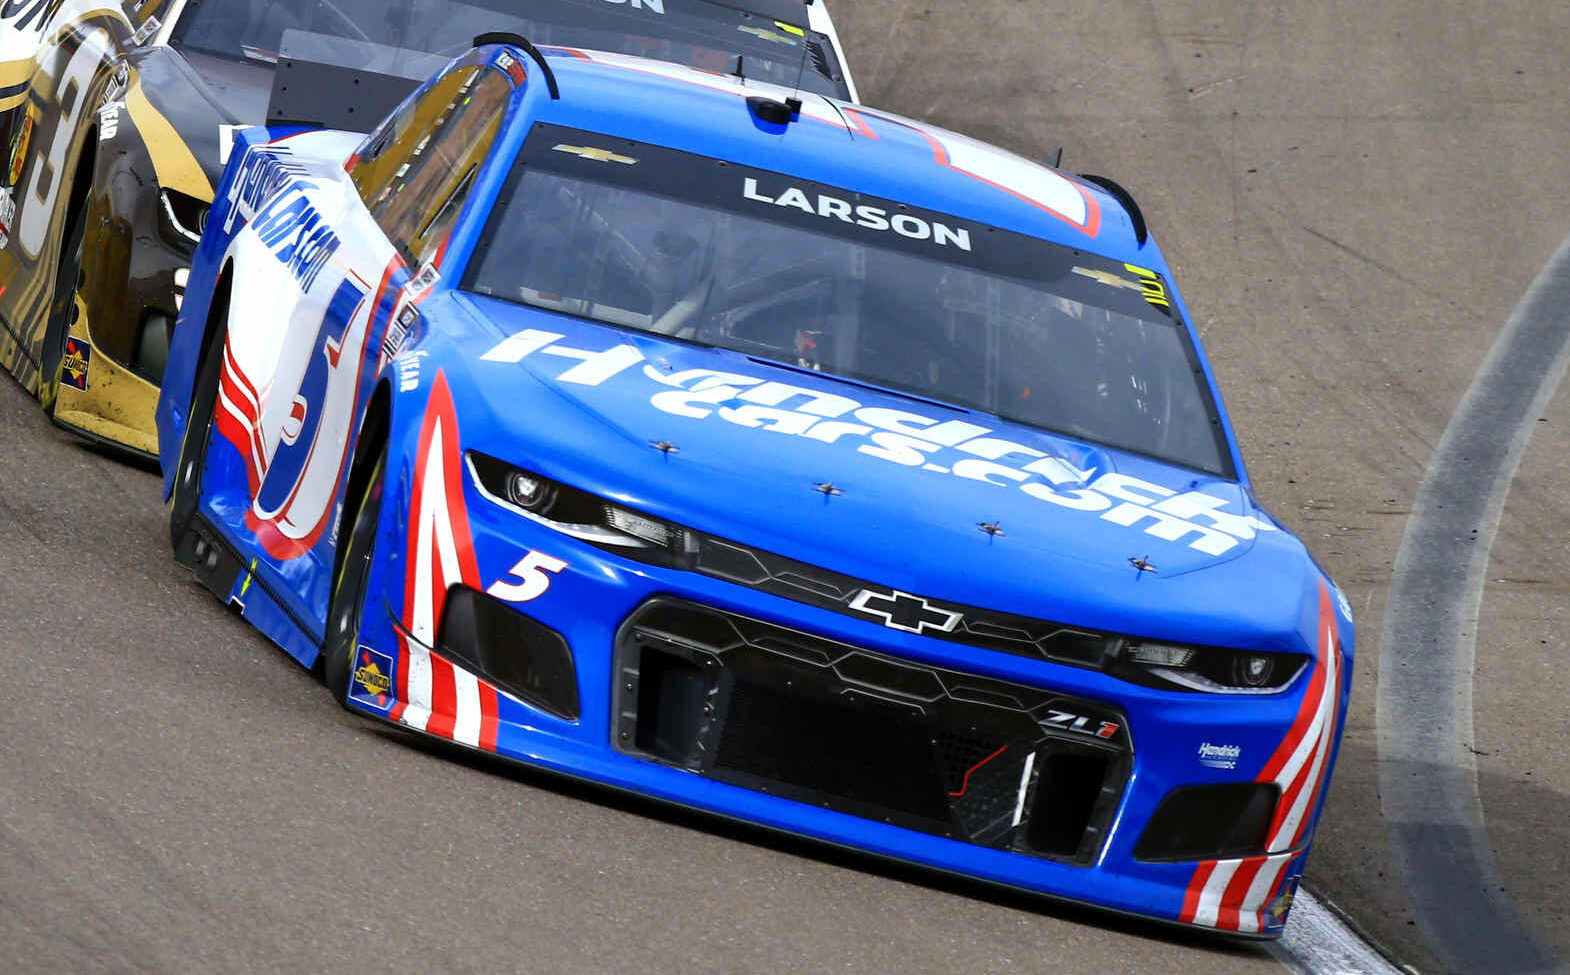 Can Kyle Larson succeed in his long route back to NASCAR glory?